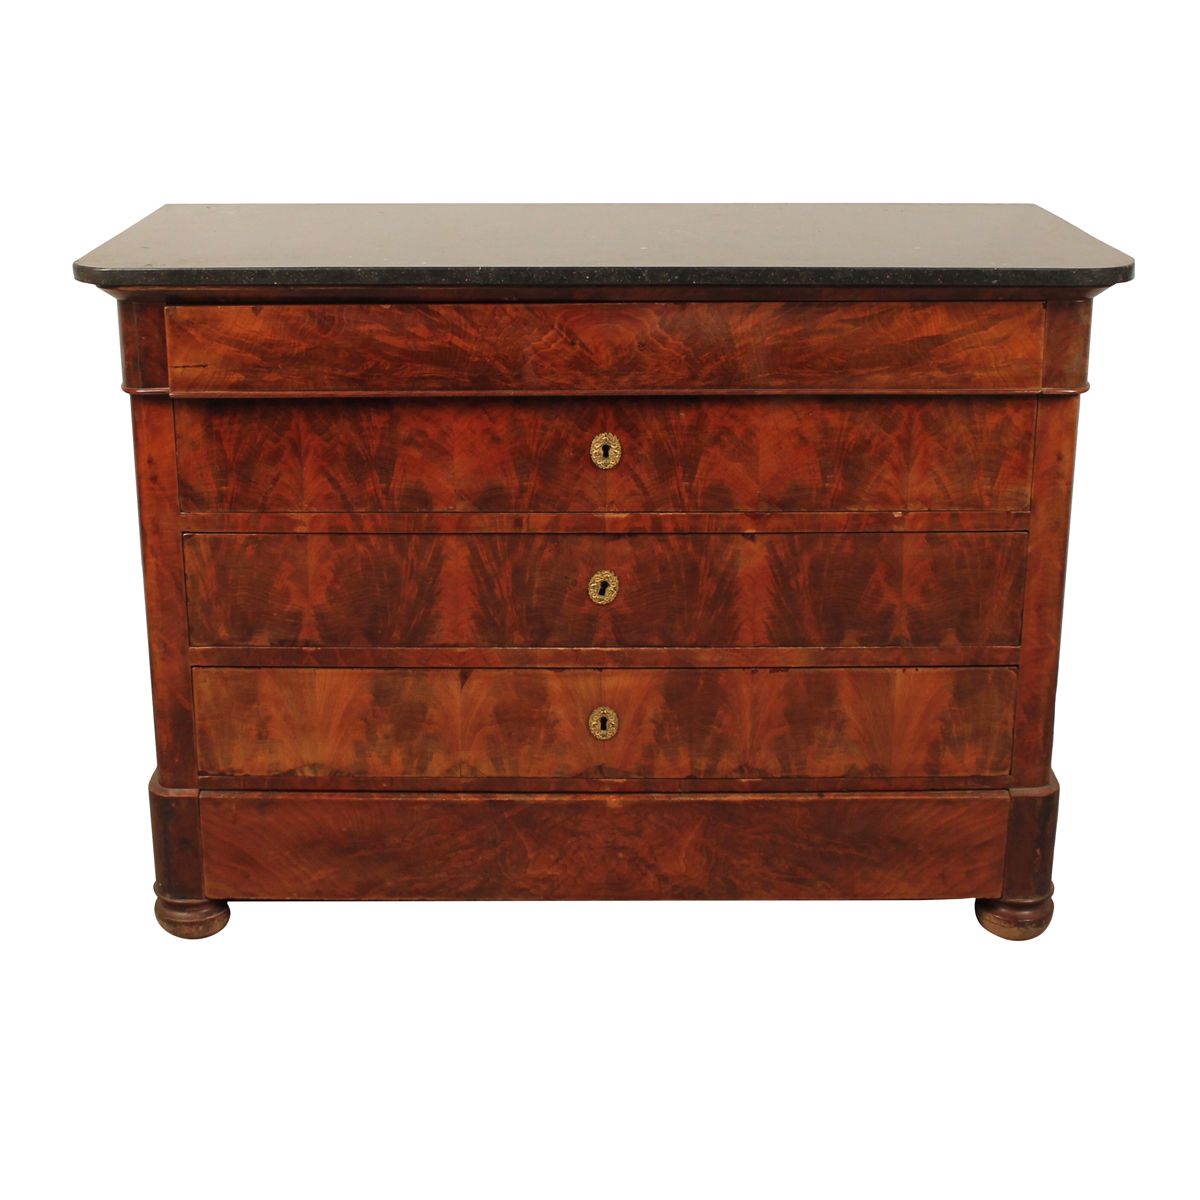 CASSETTONE A QUATTRO CASSETTI - COMMODE WITH FOUR DRAWERS Mahagoni-Feder mit sch&hellip;